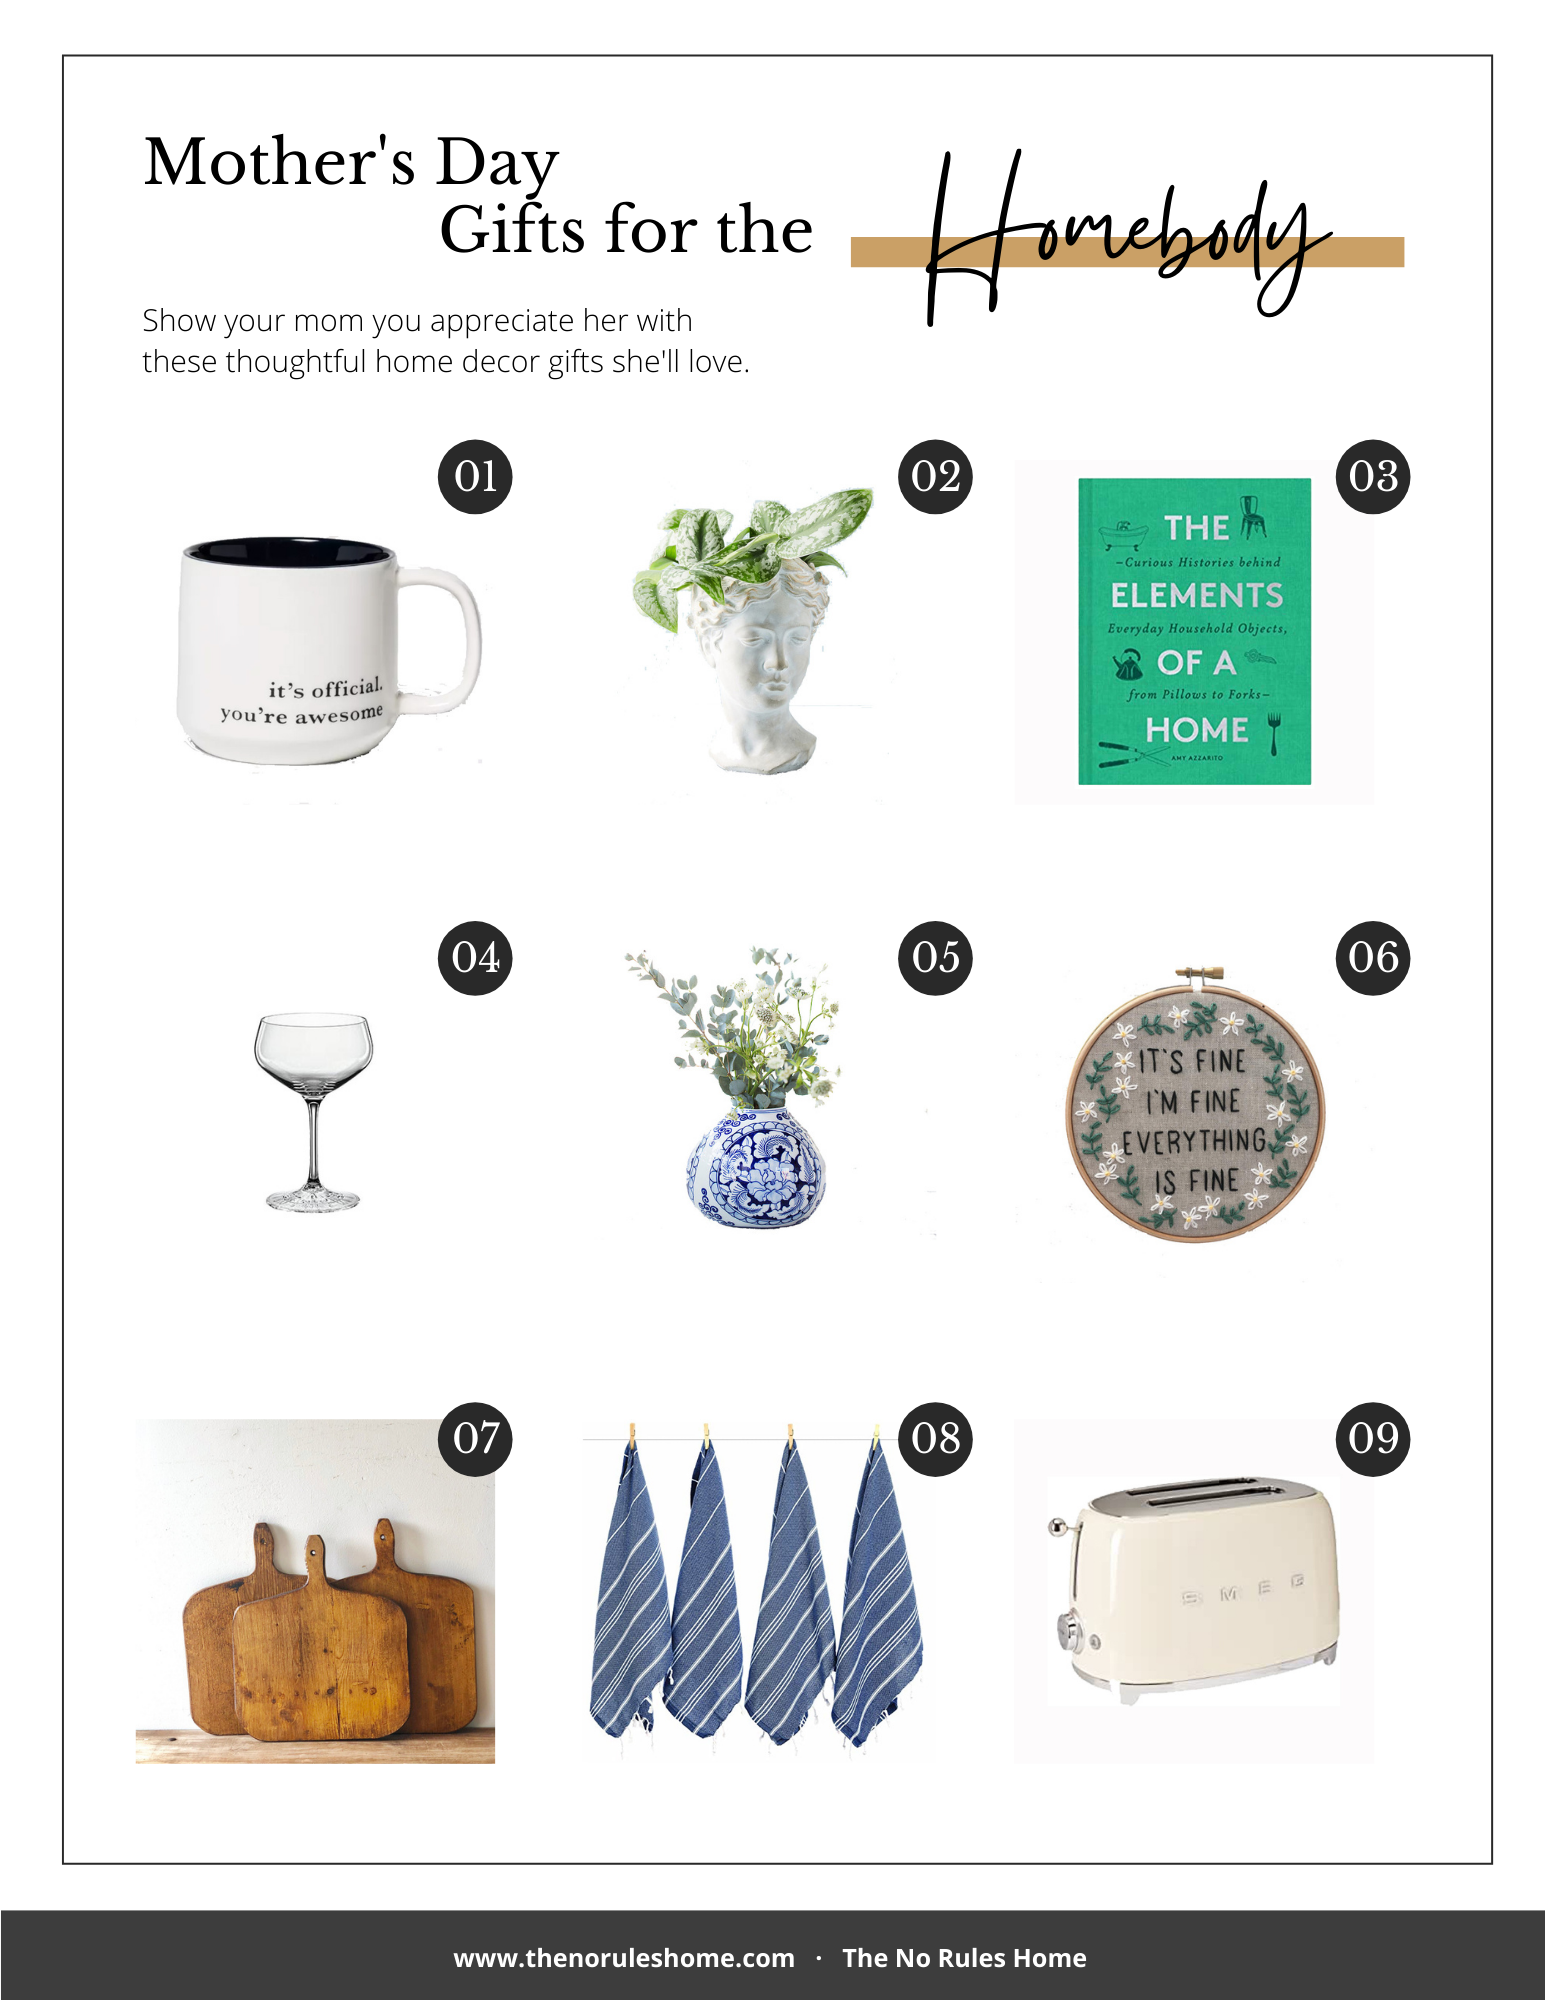 Mother's Day Gift Guide for the Homebody 2021